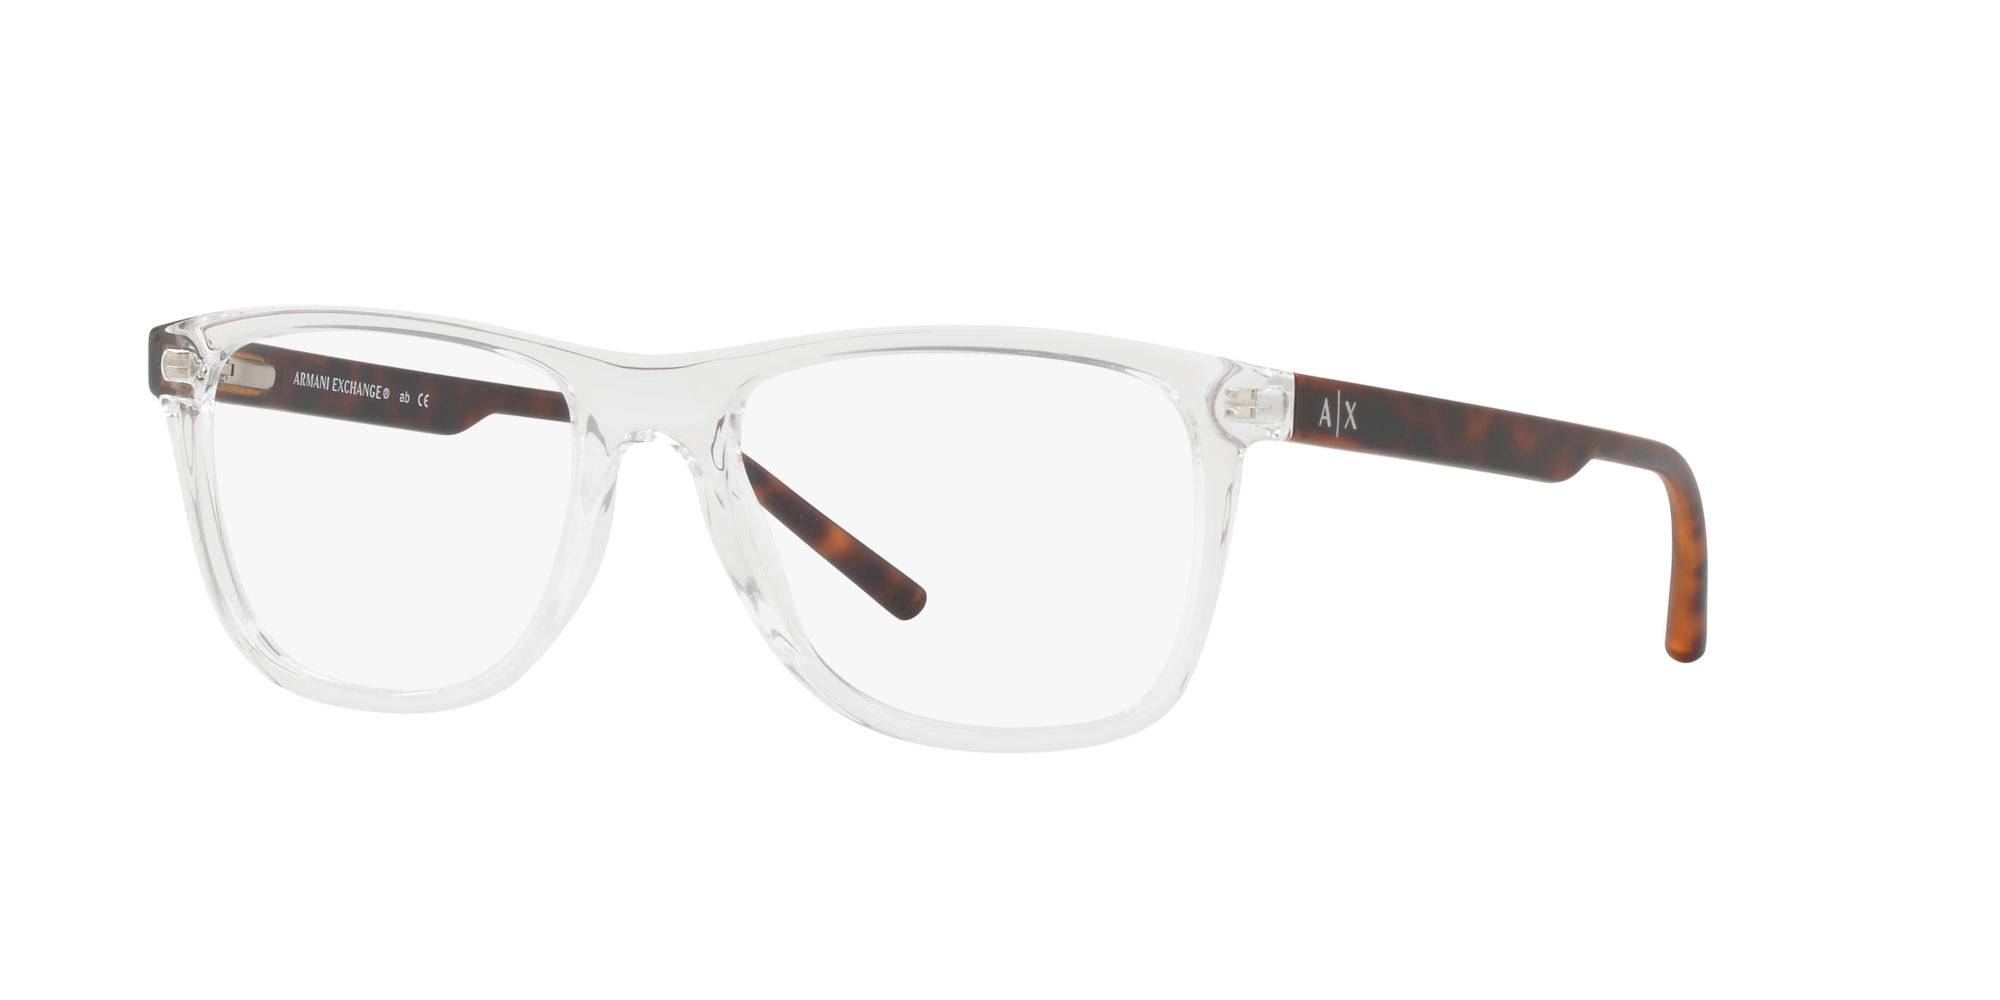 Clear/white glasses | Target Optical